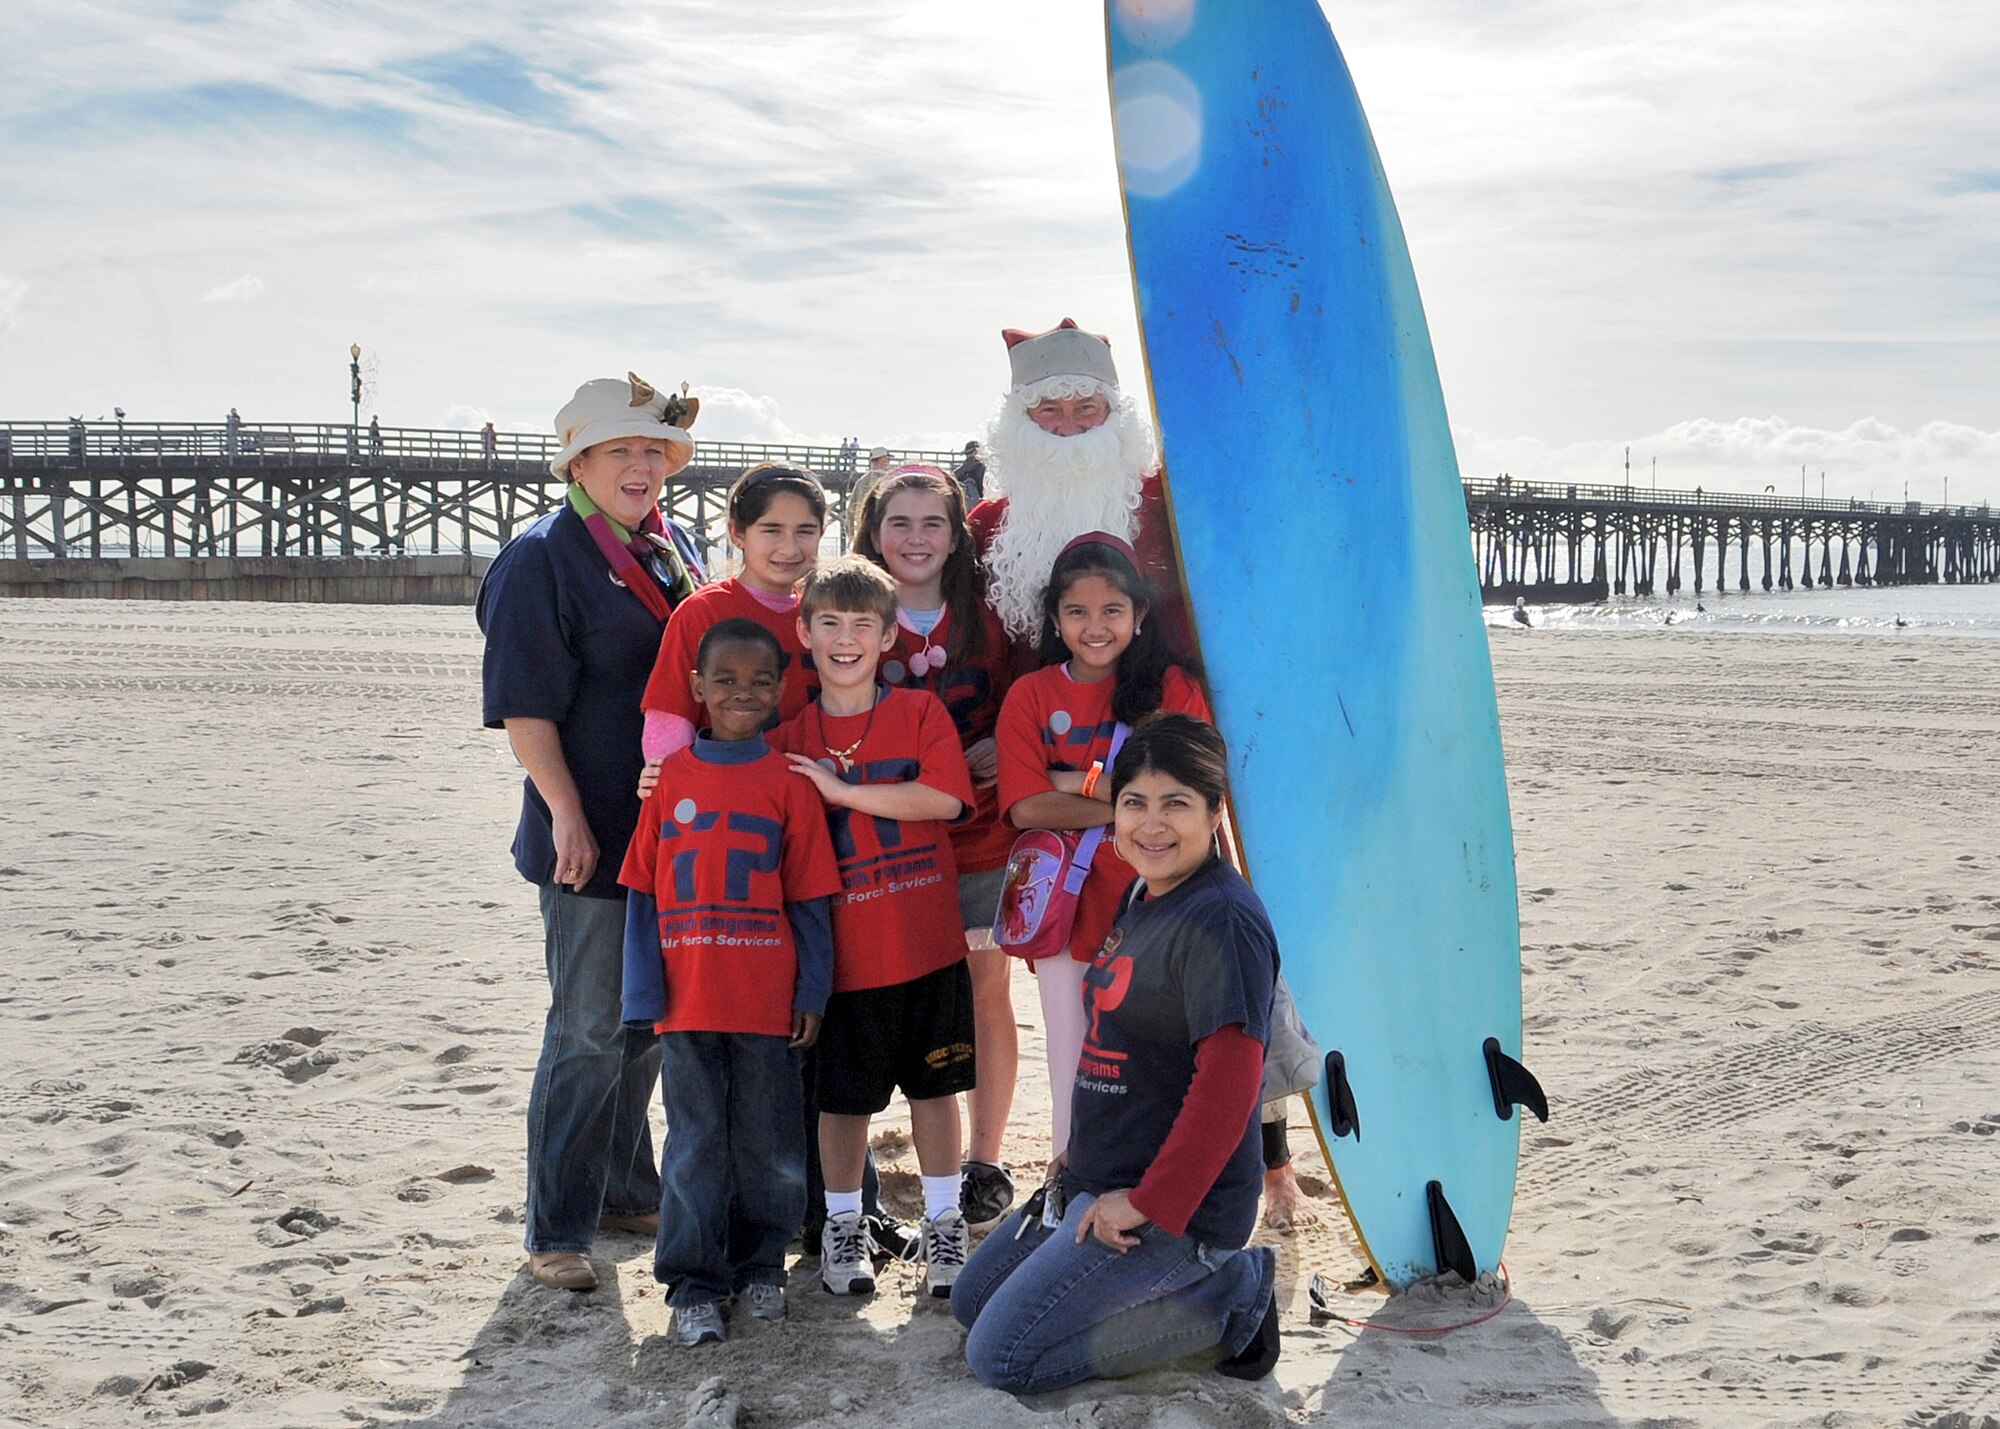 The children and their leaders from the Los Angeles Air Force Base Youth Services ran into a surfing Santa at Seal Beach, Calif., during their holiday shopping spree to buy gifts for friends and family, Dec. 23. The group visited a local shell store where they shopped for their gifts and enjoyed some treats at a local ice cream shop. (Photo by Joe Juarez)